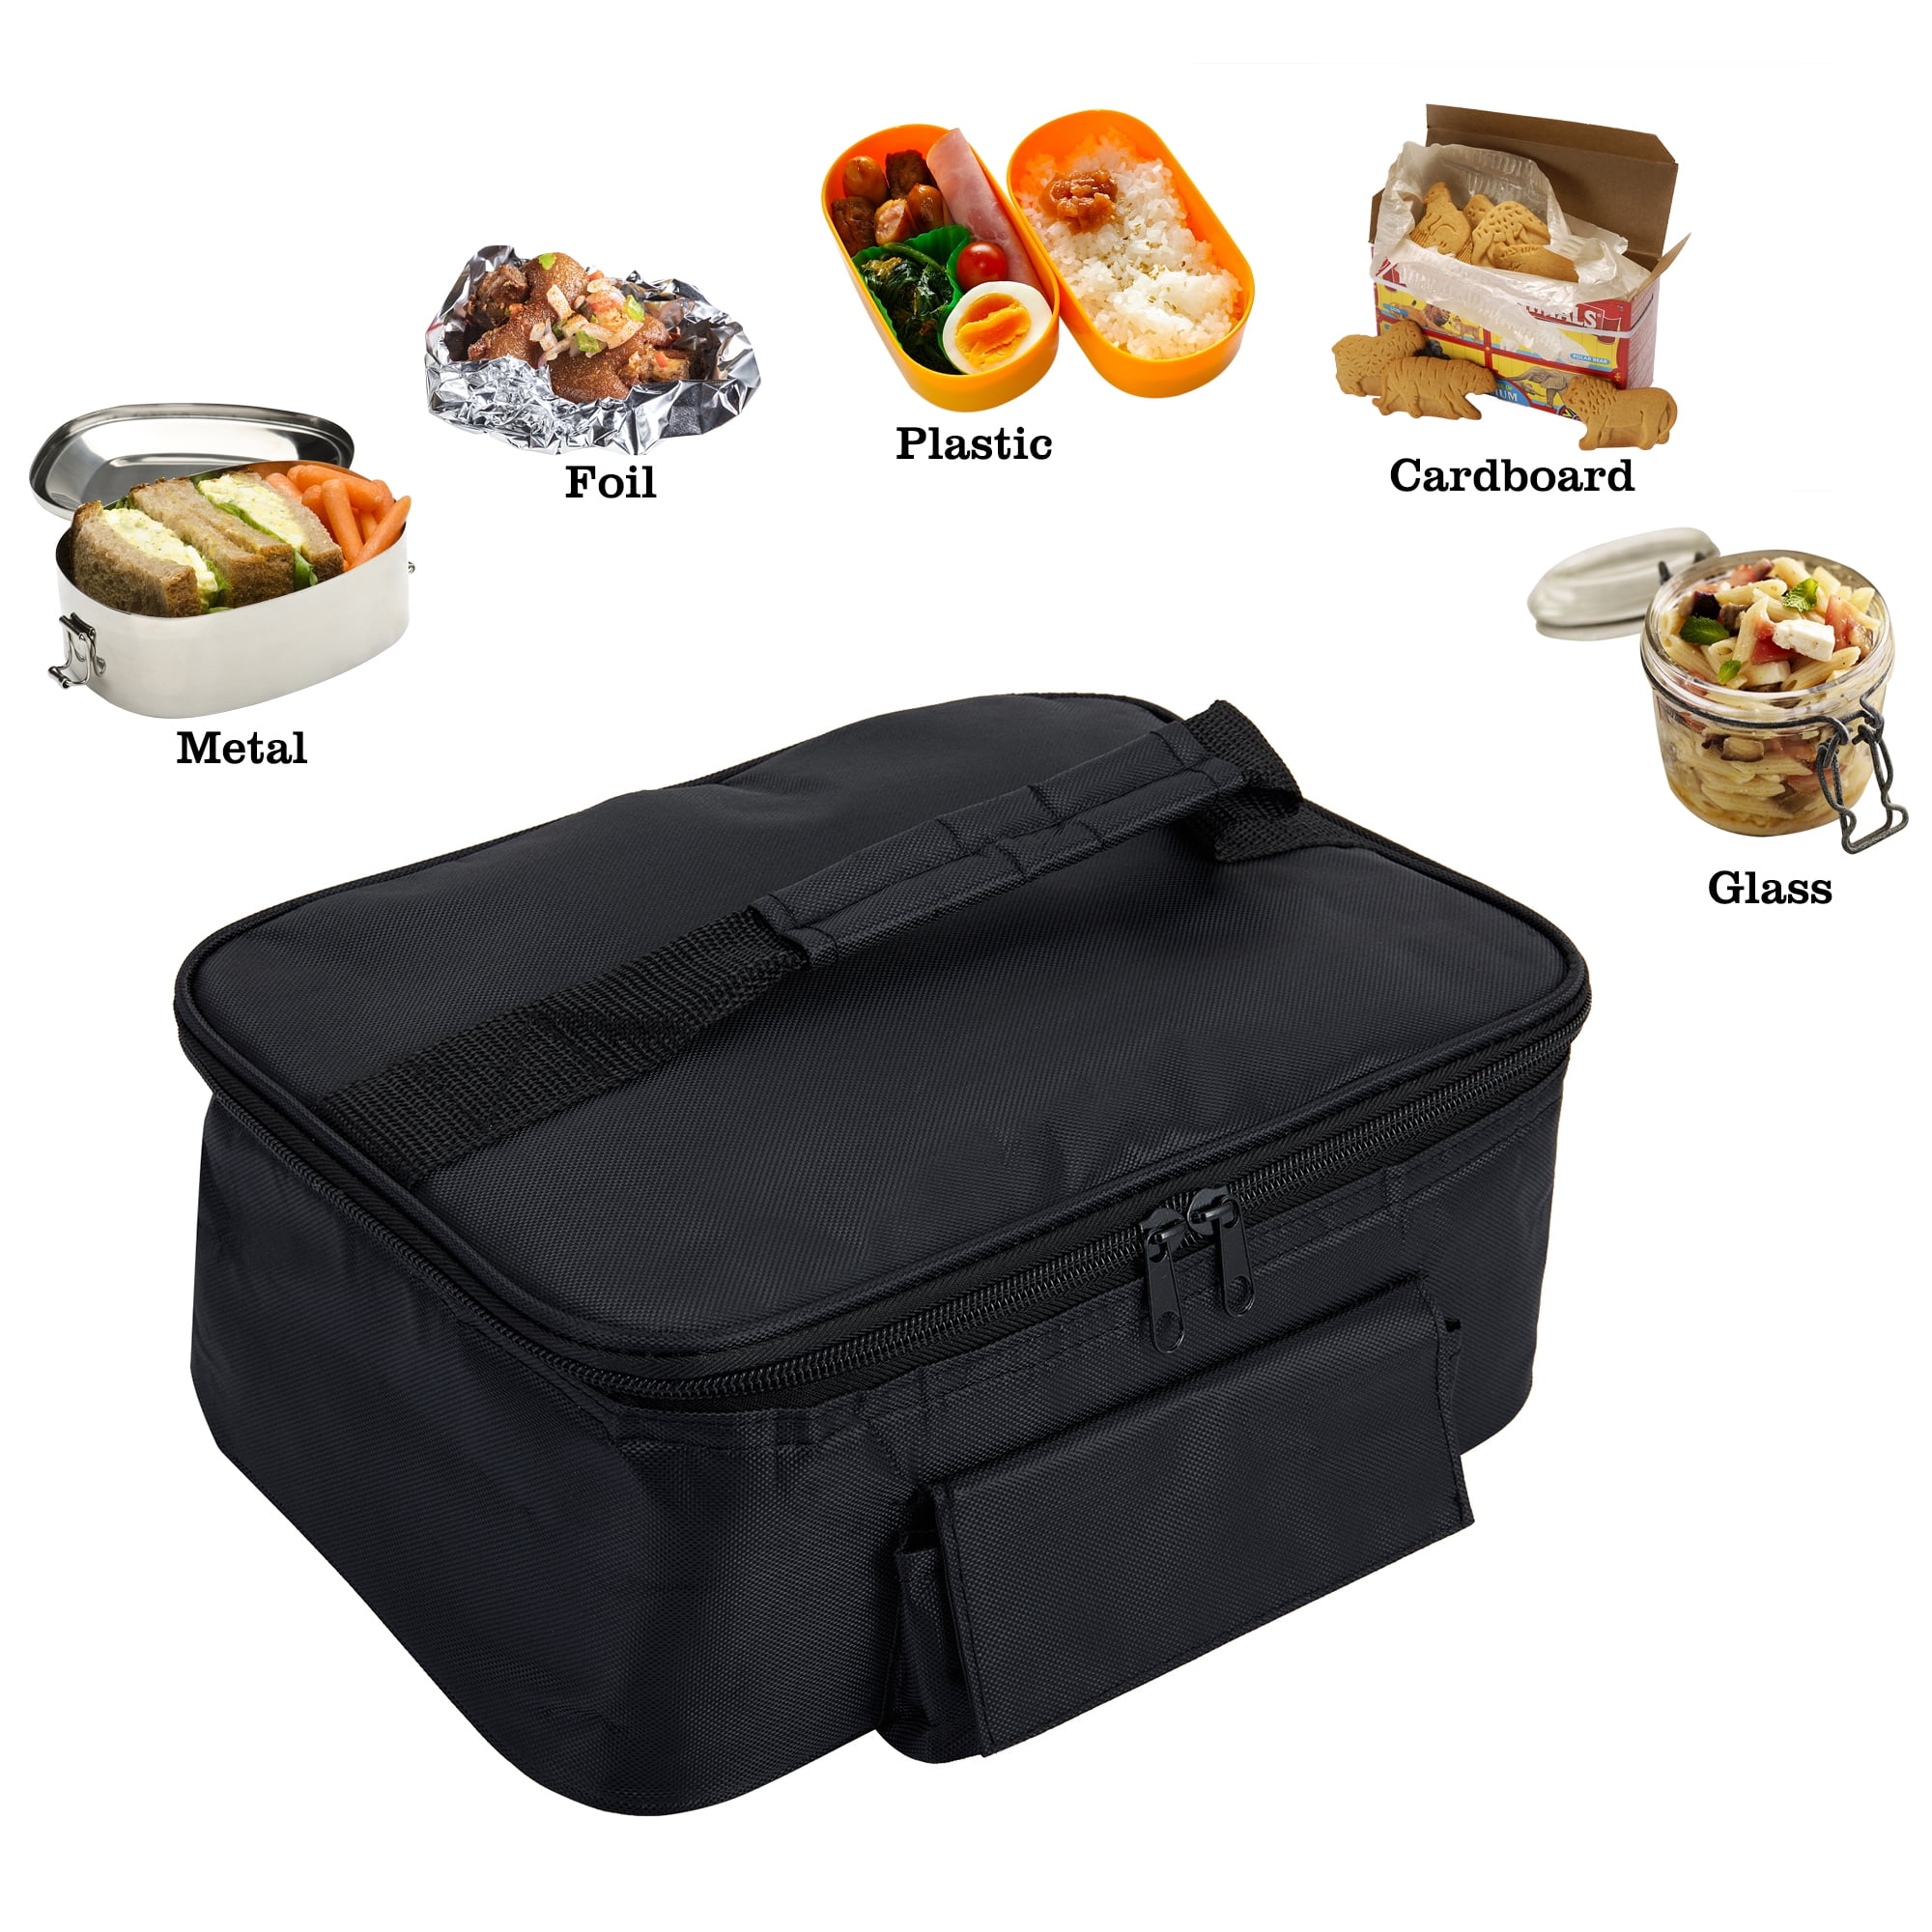 Portable Oven 12V Car Food Warmer Large Electric Lunch Box